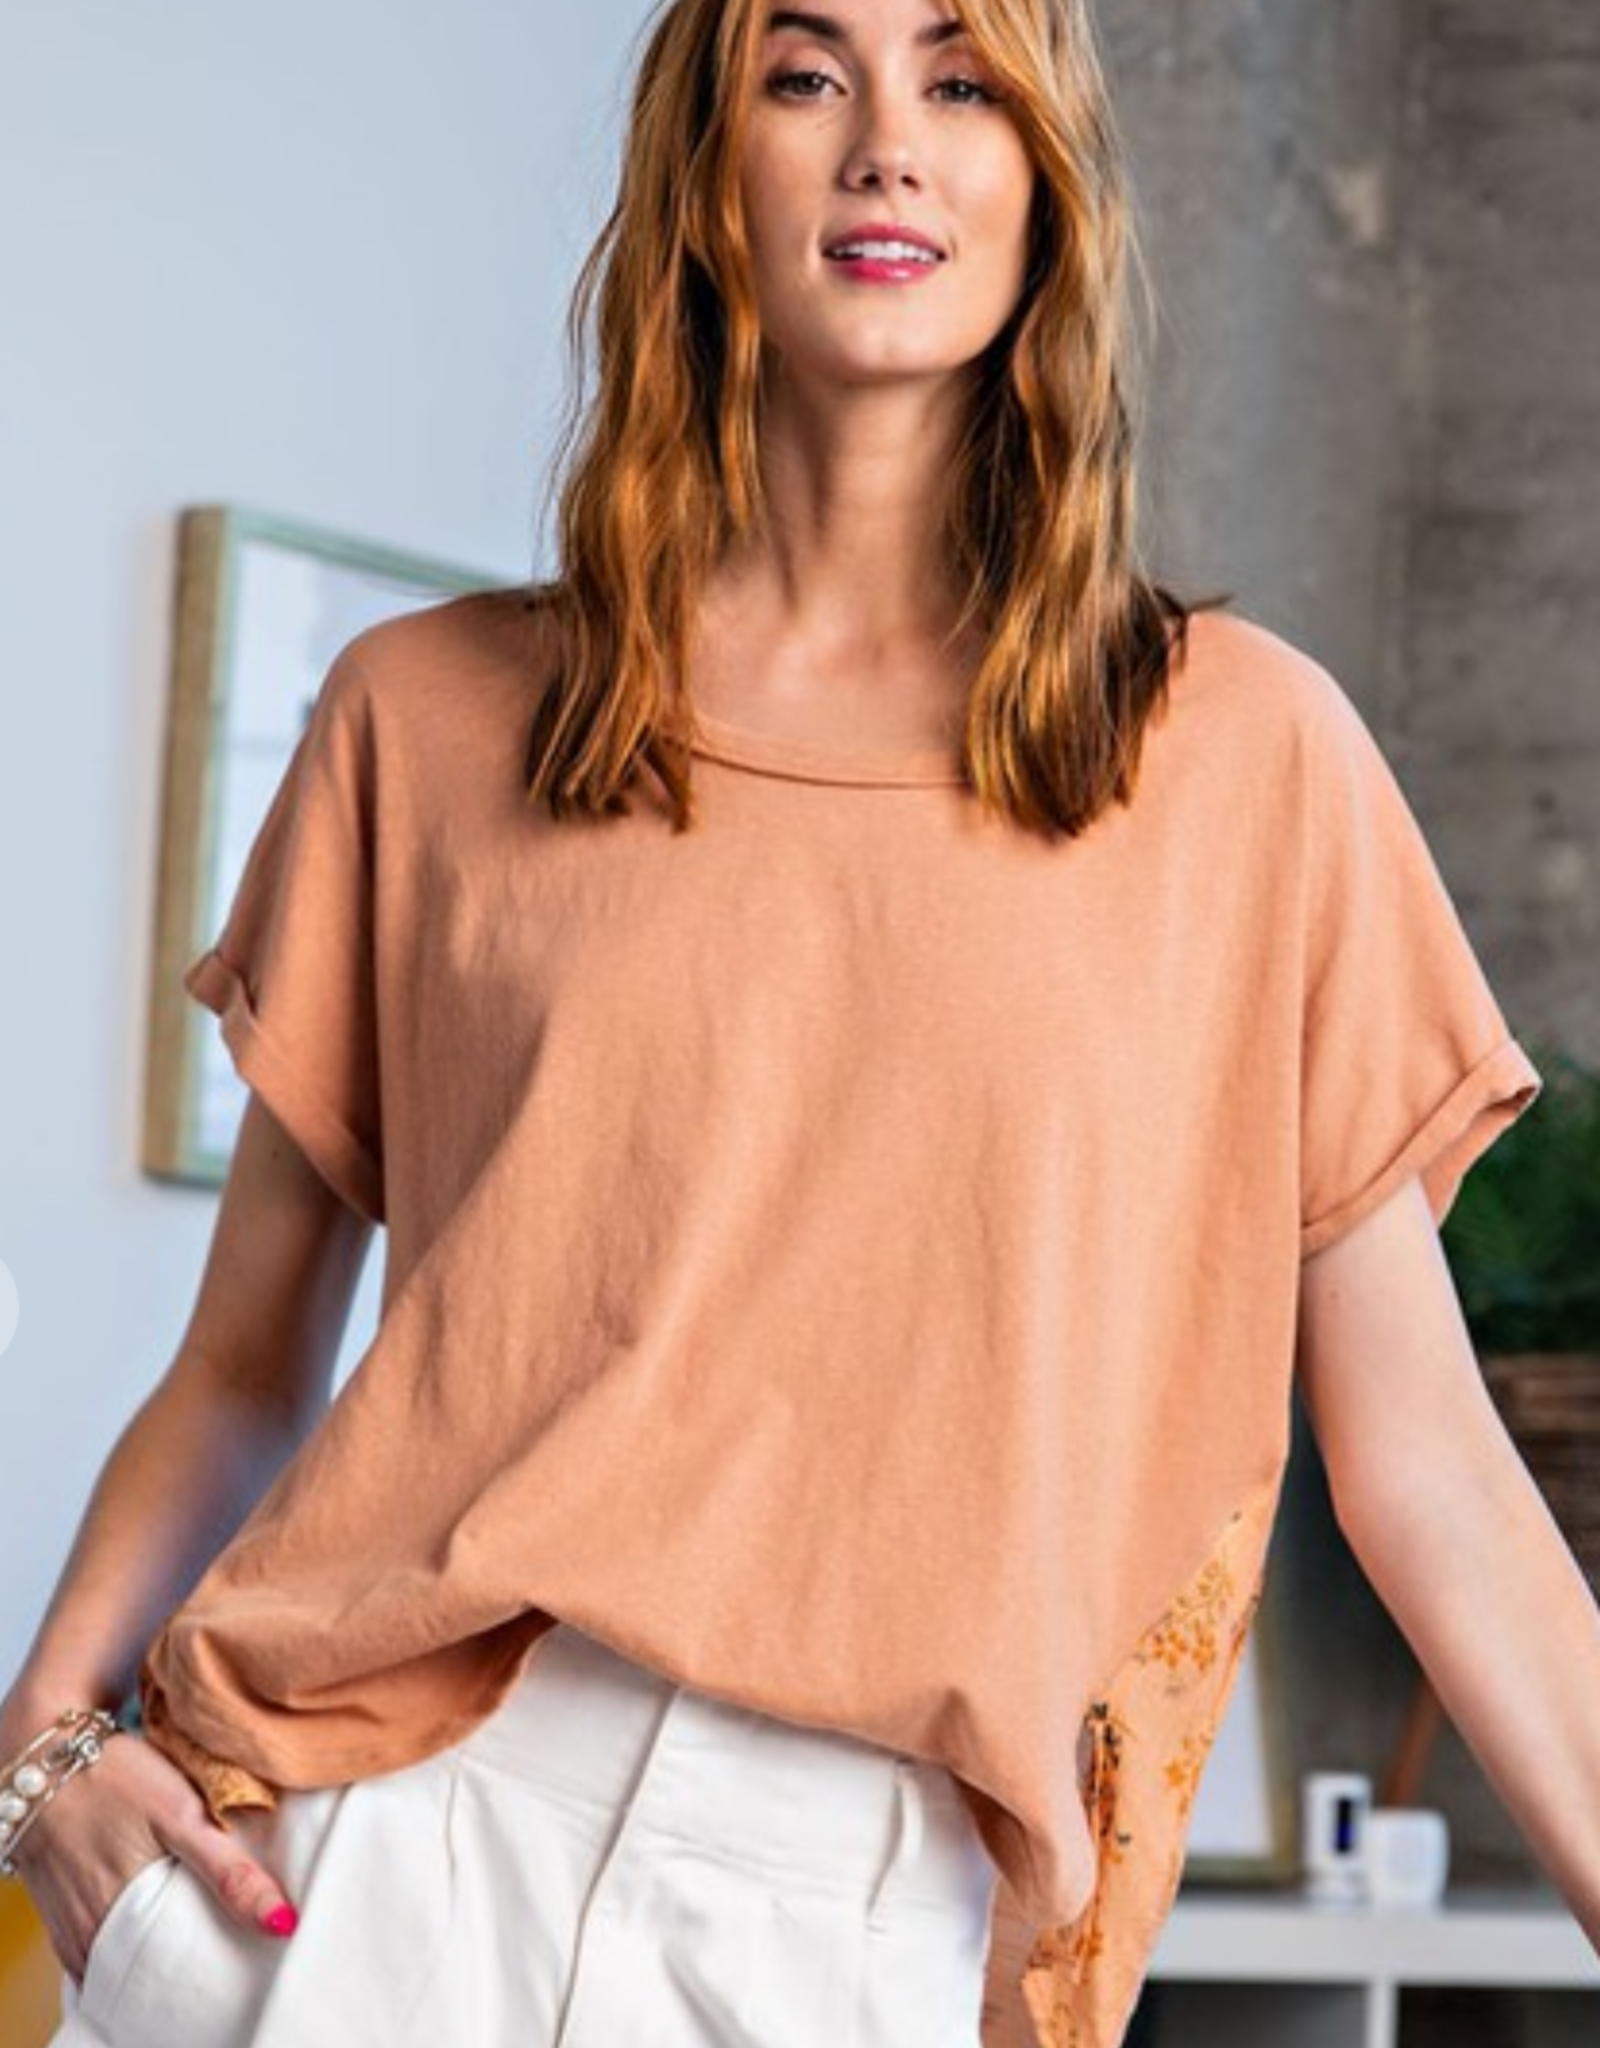 EASEL WASHED CORAL BOXY TOP